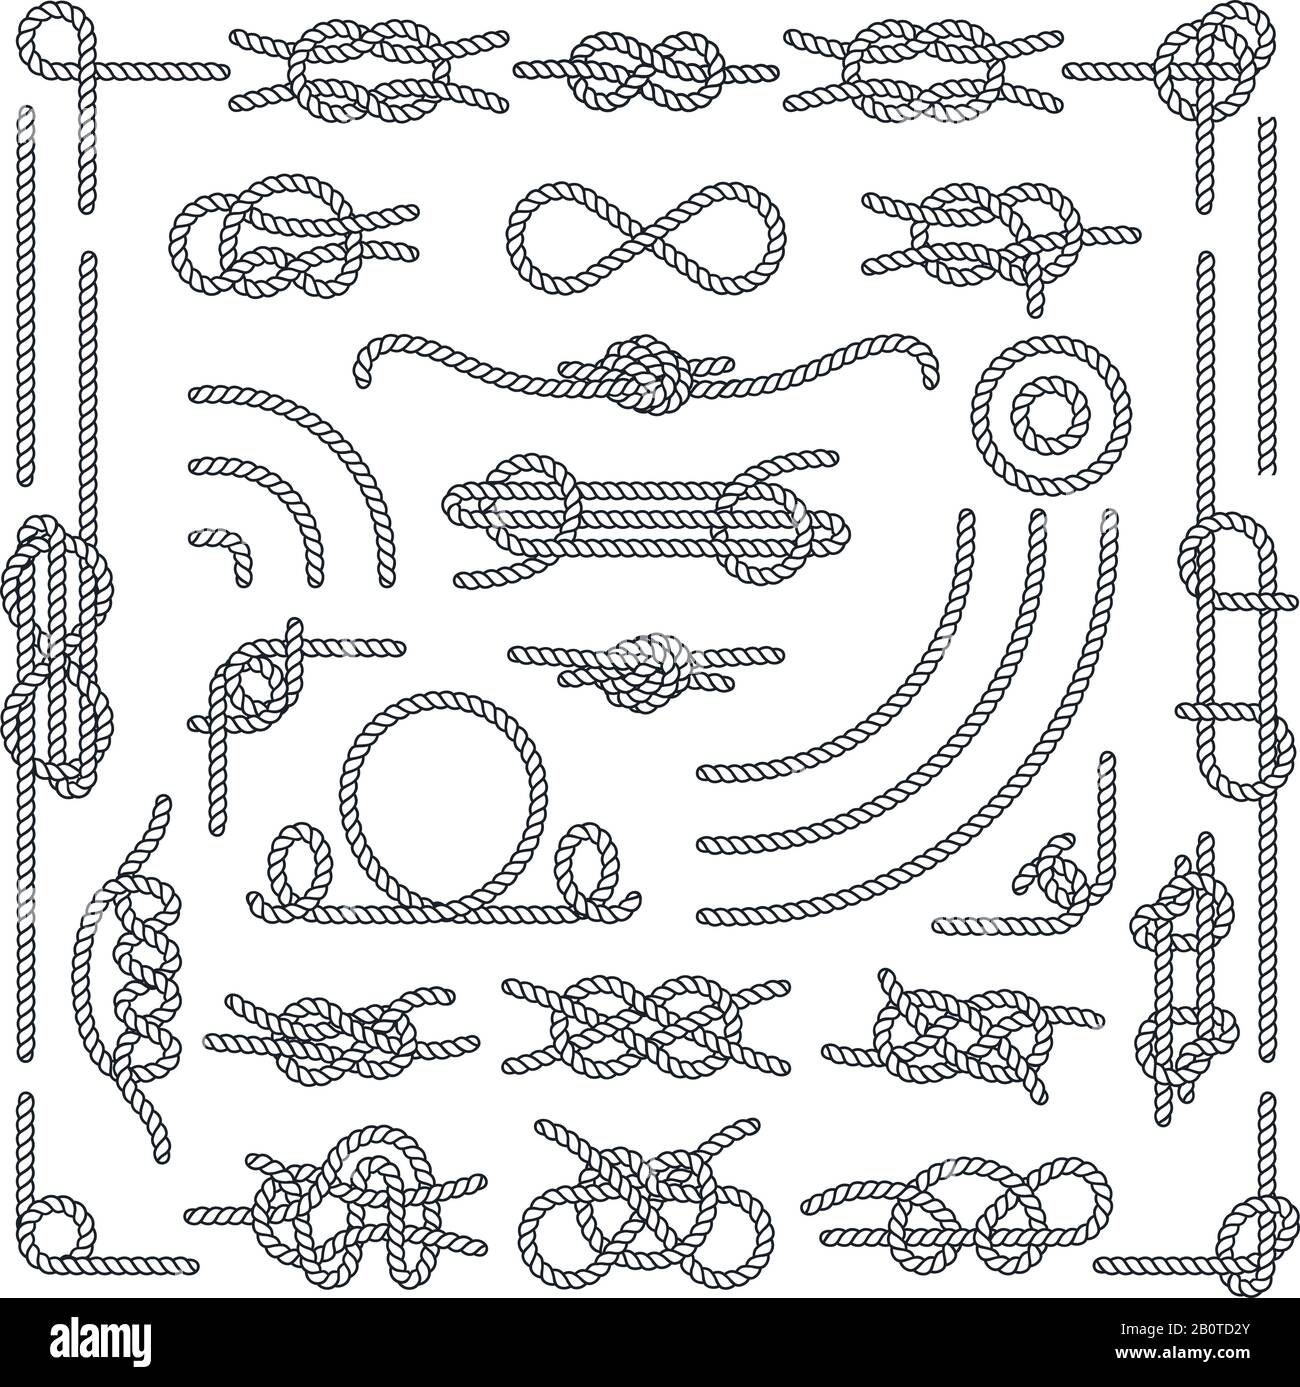 Nautical rope knots vector decorative vintage elements. Set of rope knots, illustration of vintage rope marine Stock Vector